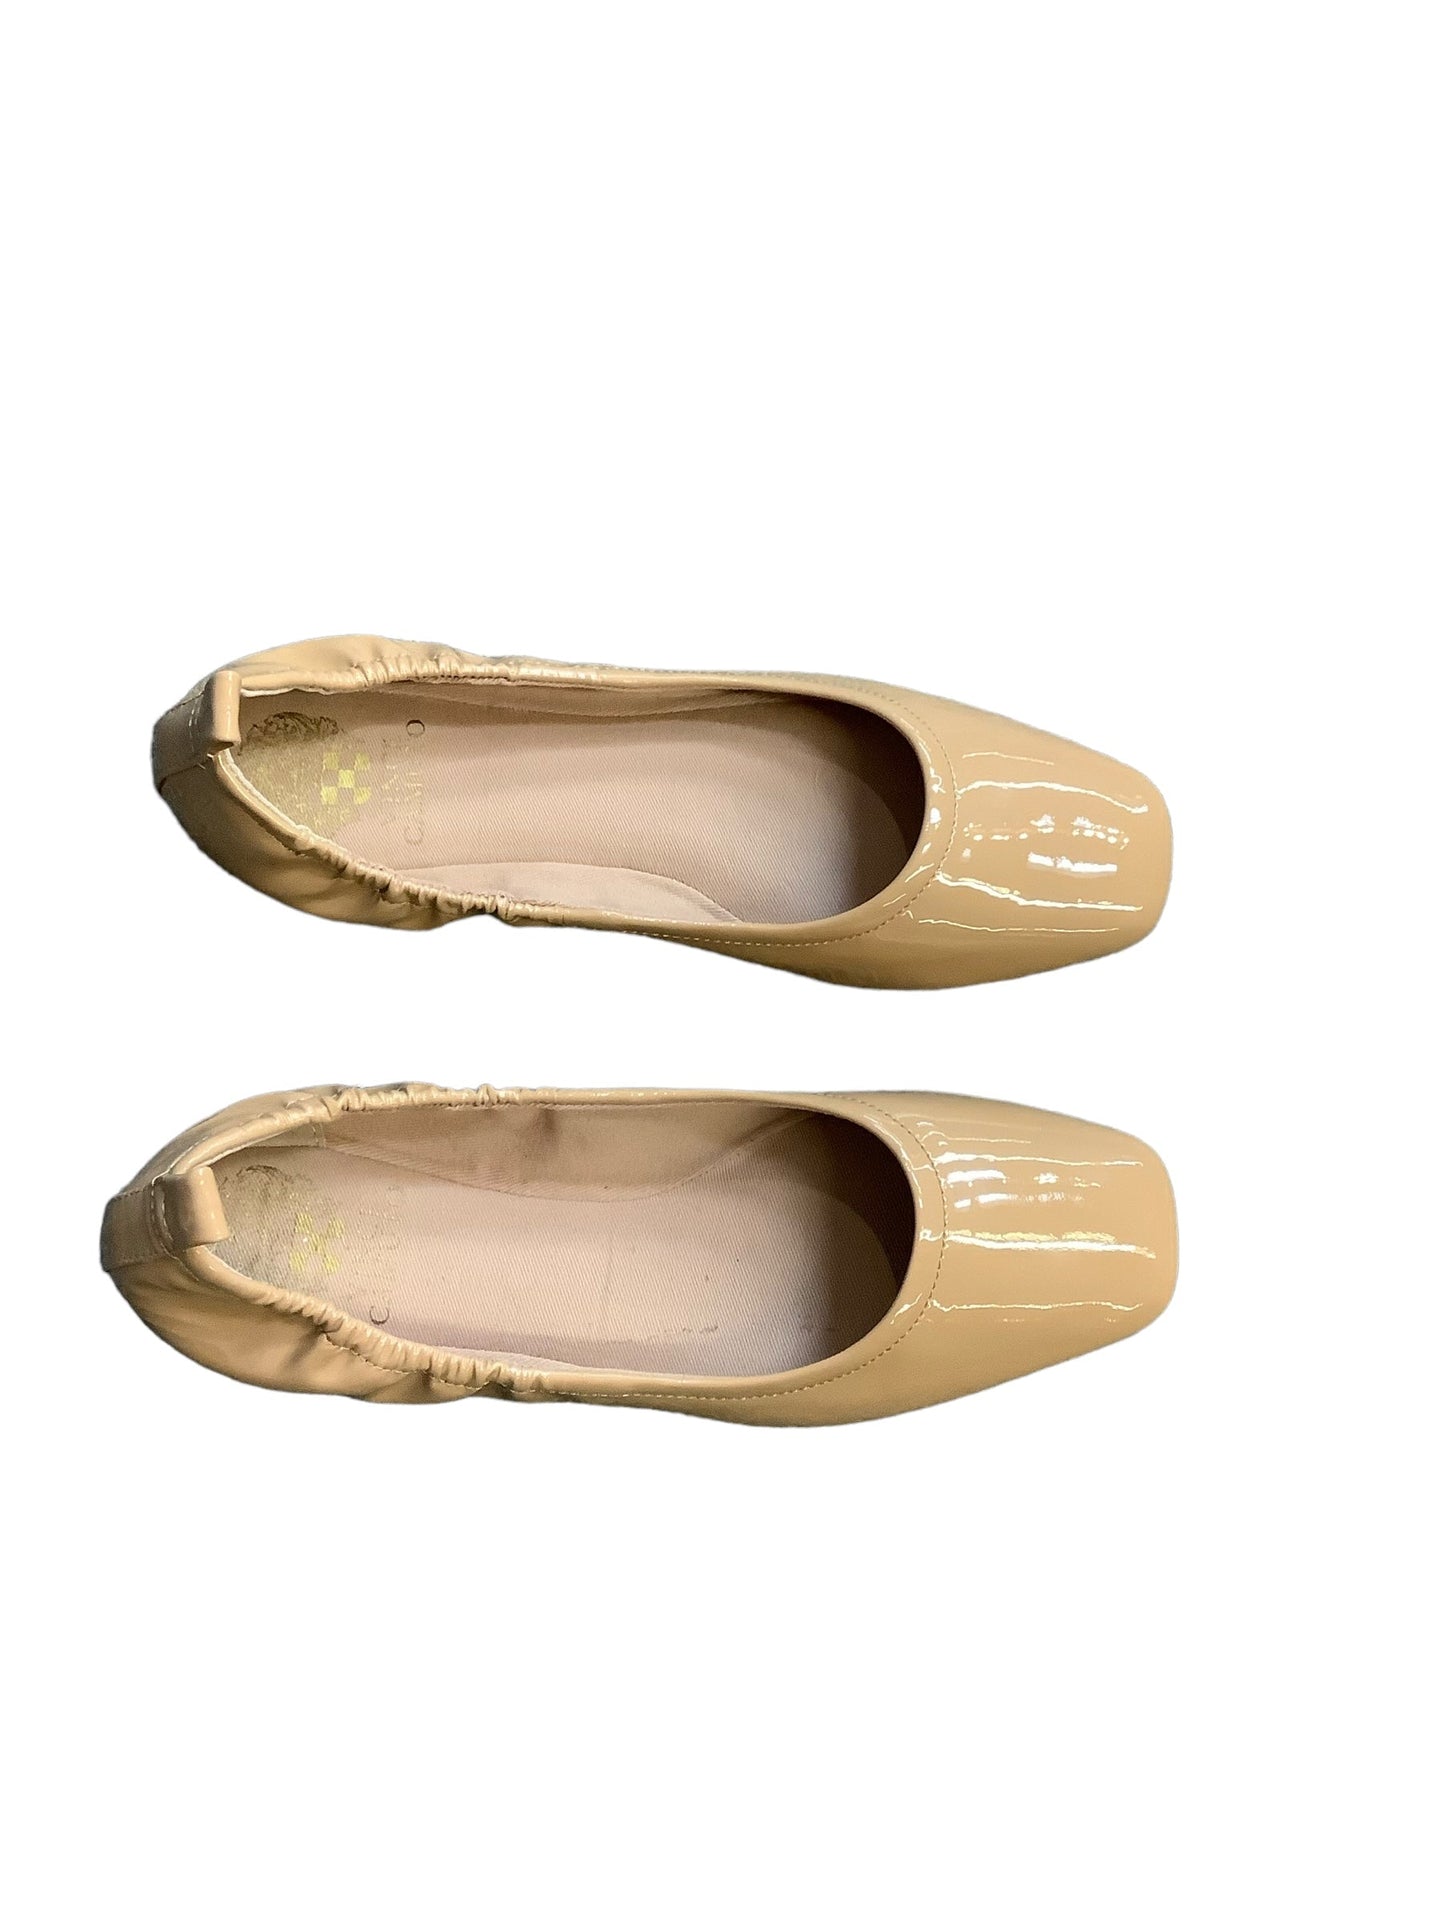 Shoes Flats By Vince Camuto  Size: 7